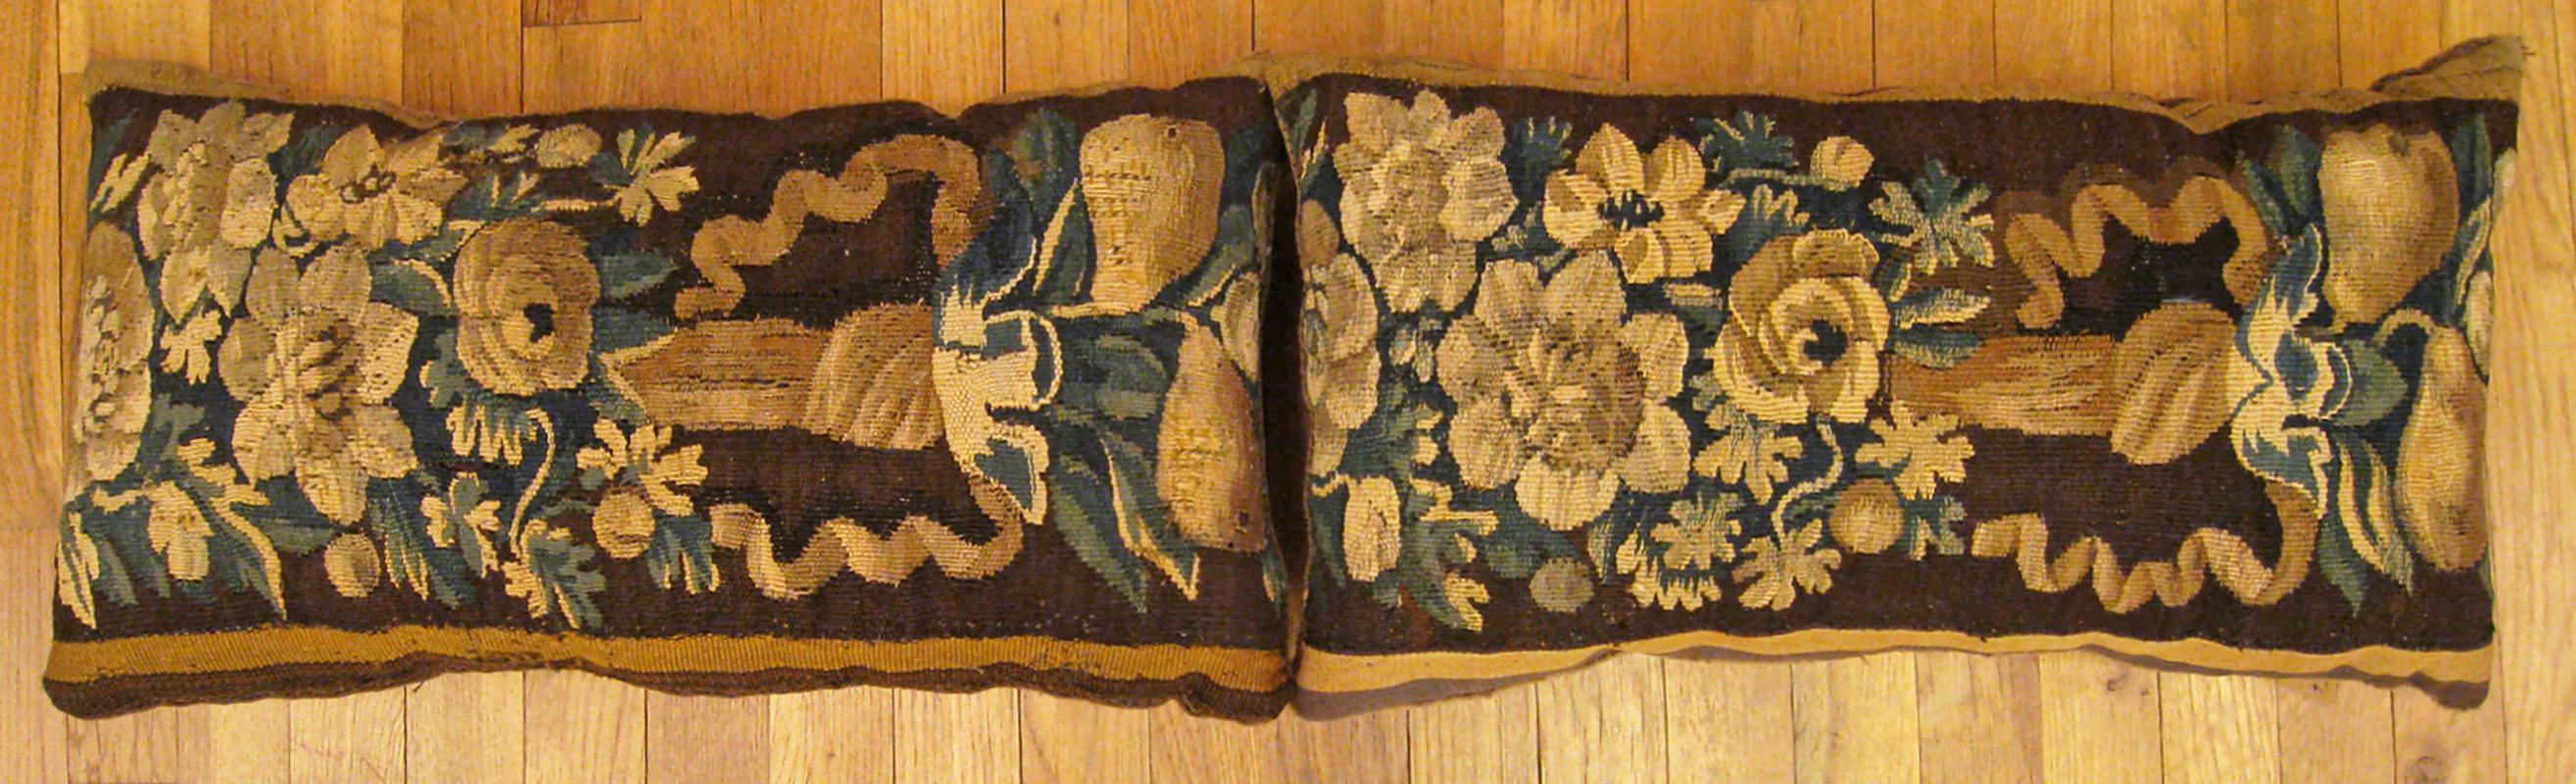 A Pair of Antique 18th Century Tapestry Pillows ; size 1'0” x 1'10” Each.

An antique decorative pillows with floral elements allover a brown central field, size 1'0” x 1'10” each. This lovely decorative pillow features an antique fabric of a 18th